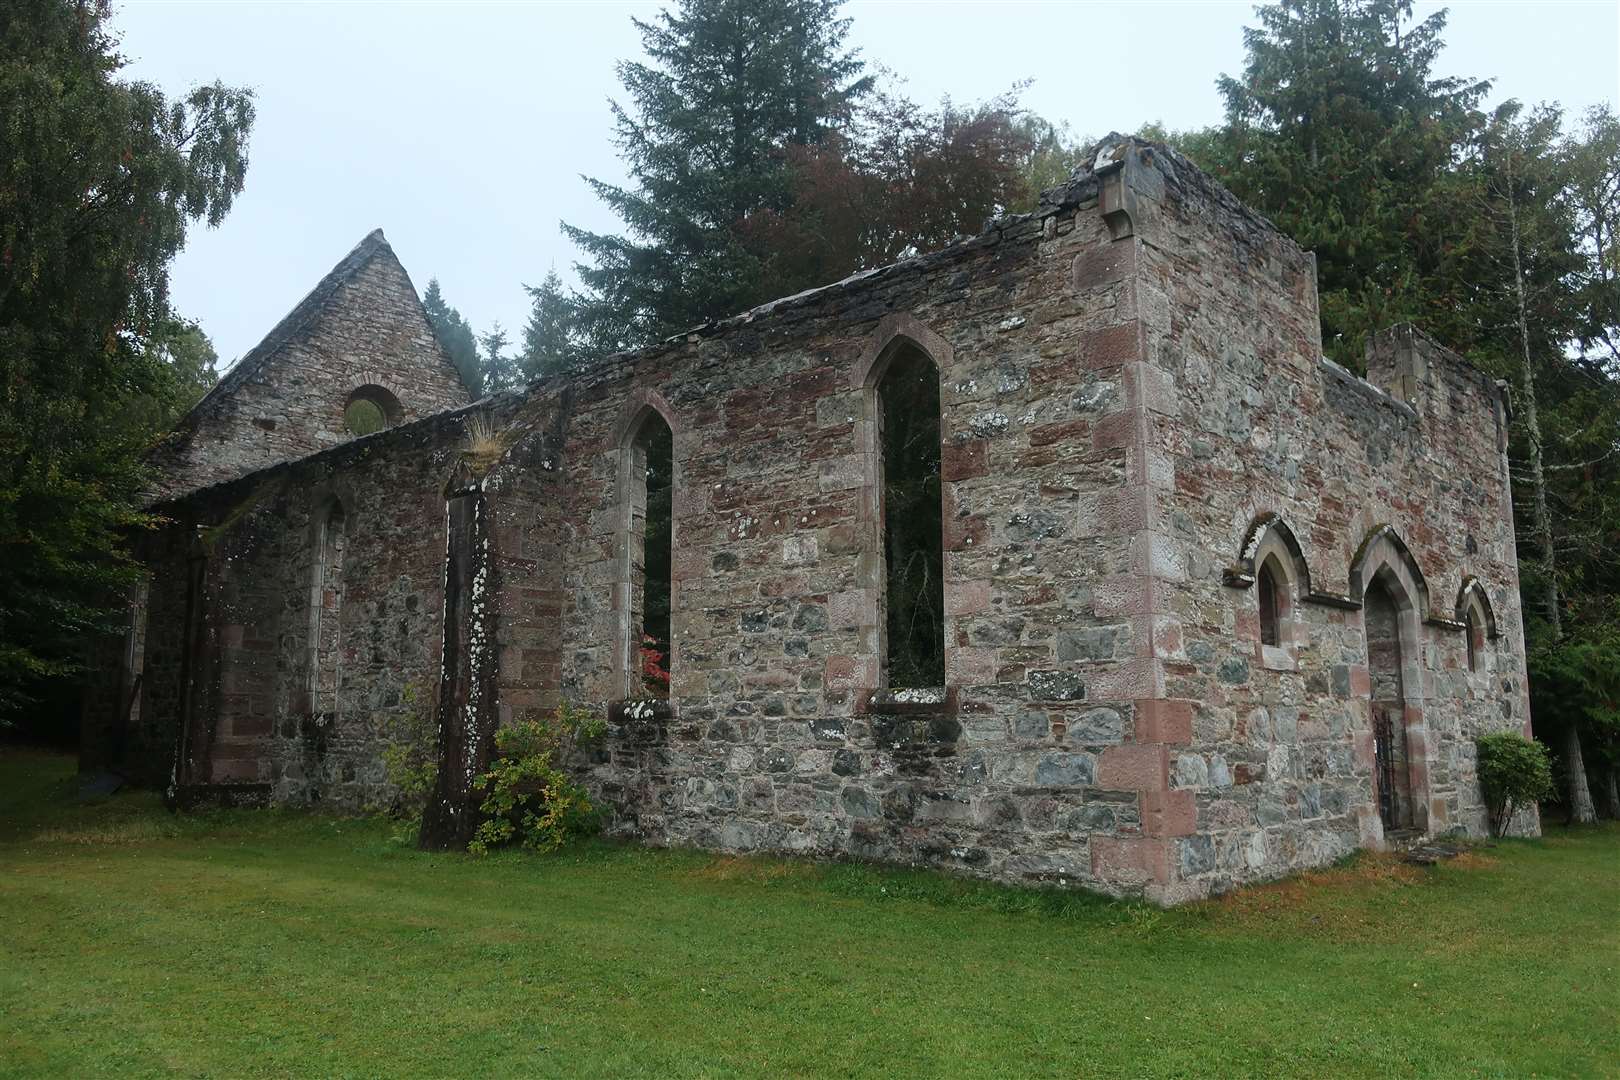 The ruins of the old free church at Jamestown, where a path leads back to Strathpeffer.